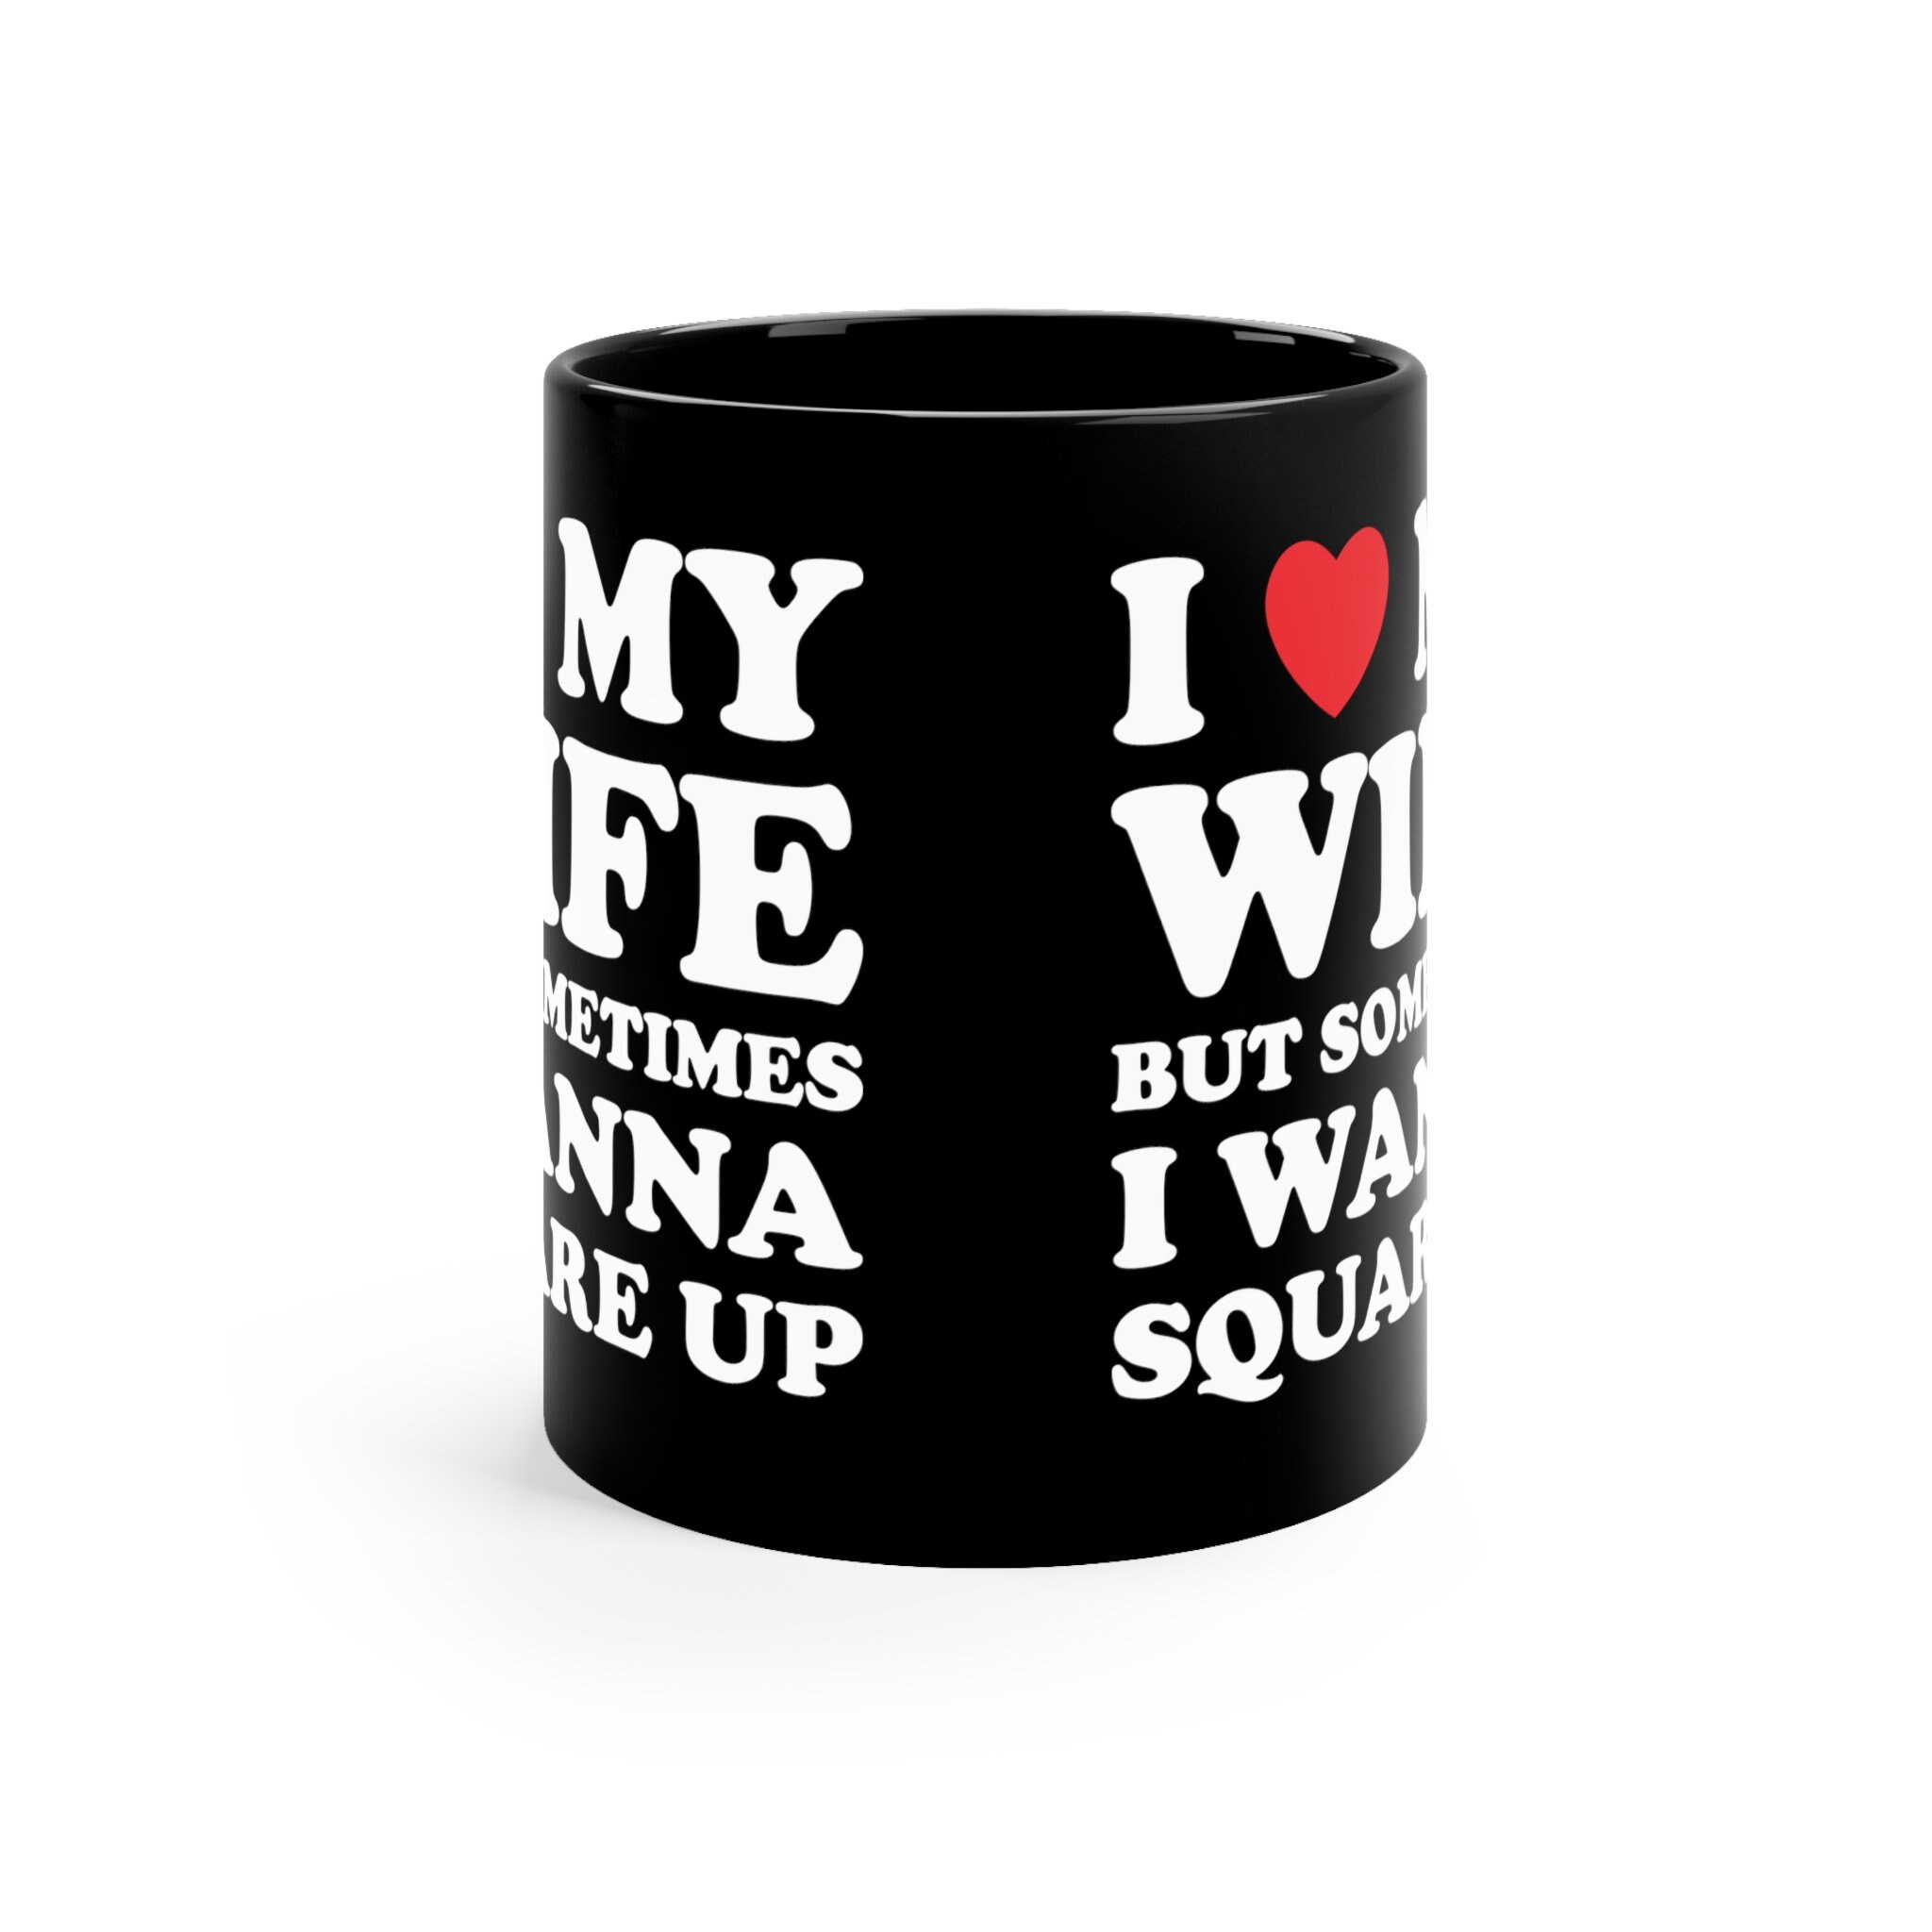 Discover I Love My Wife But Sometimes I Want To Square Up 11oz Black Mug